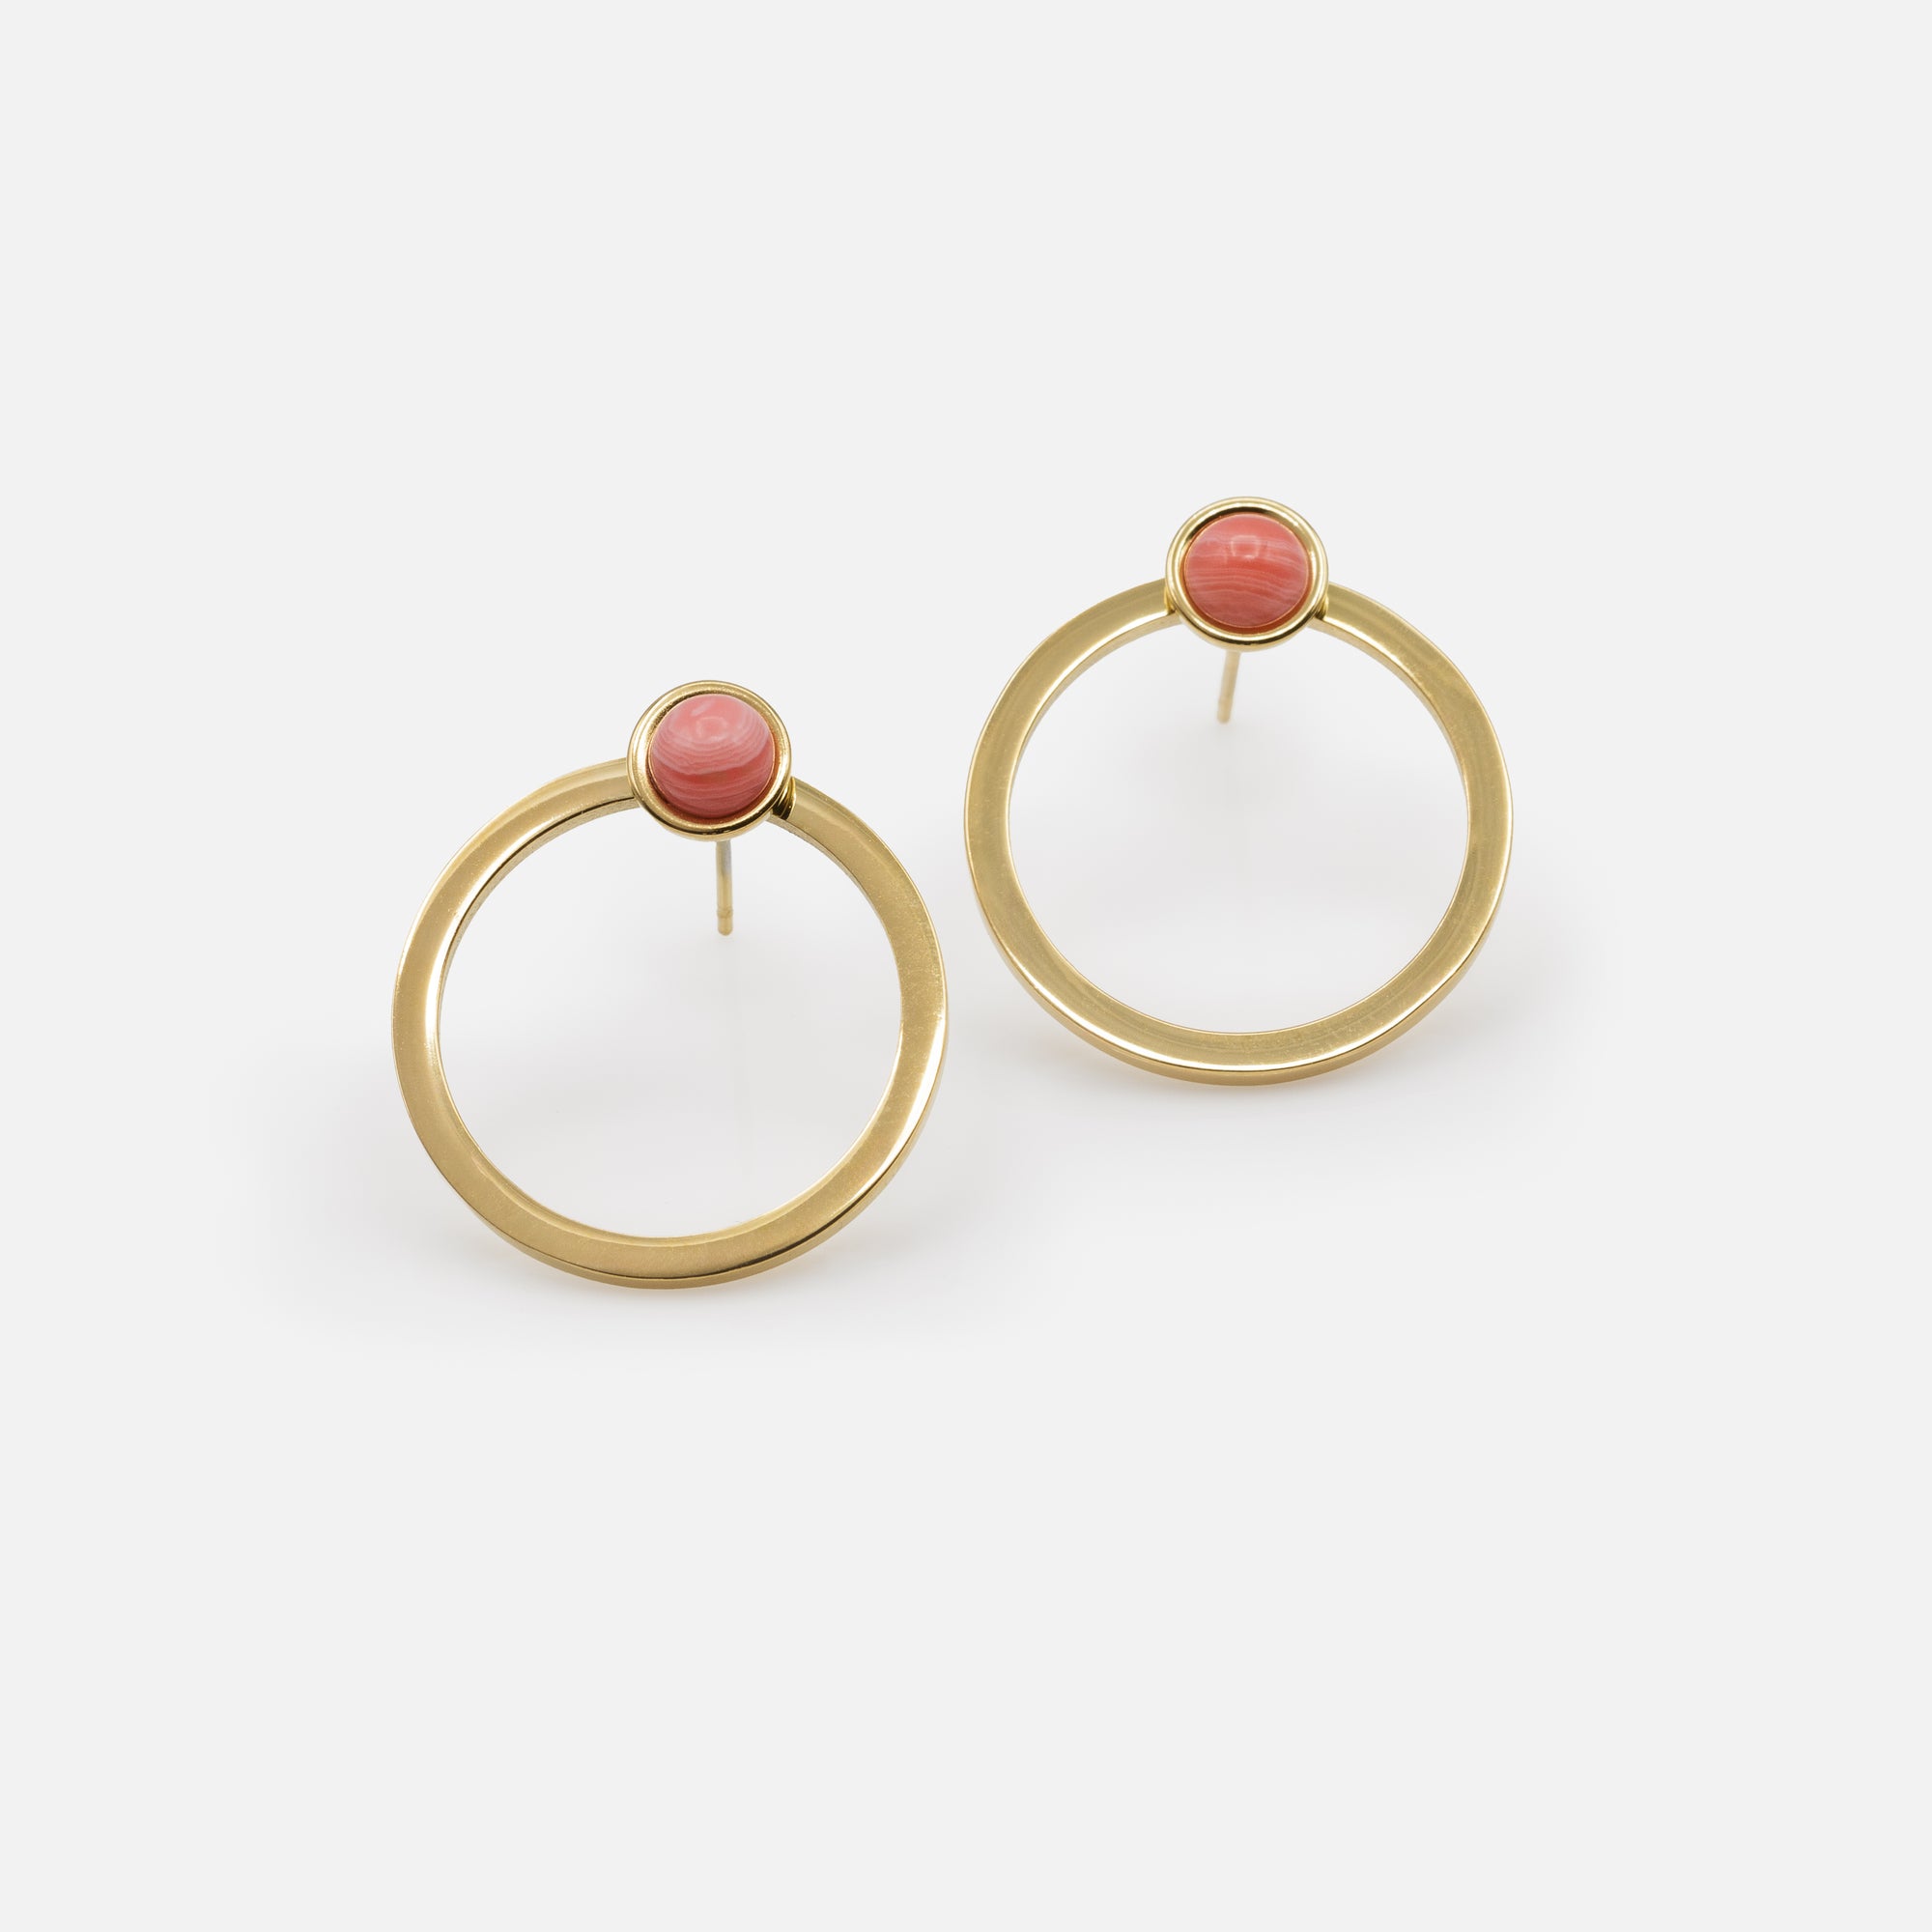 Gold hoop earrings with marbled red ball in stainless steel